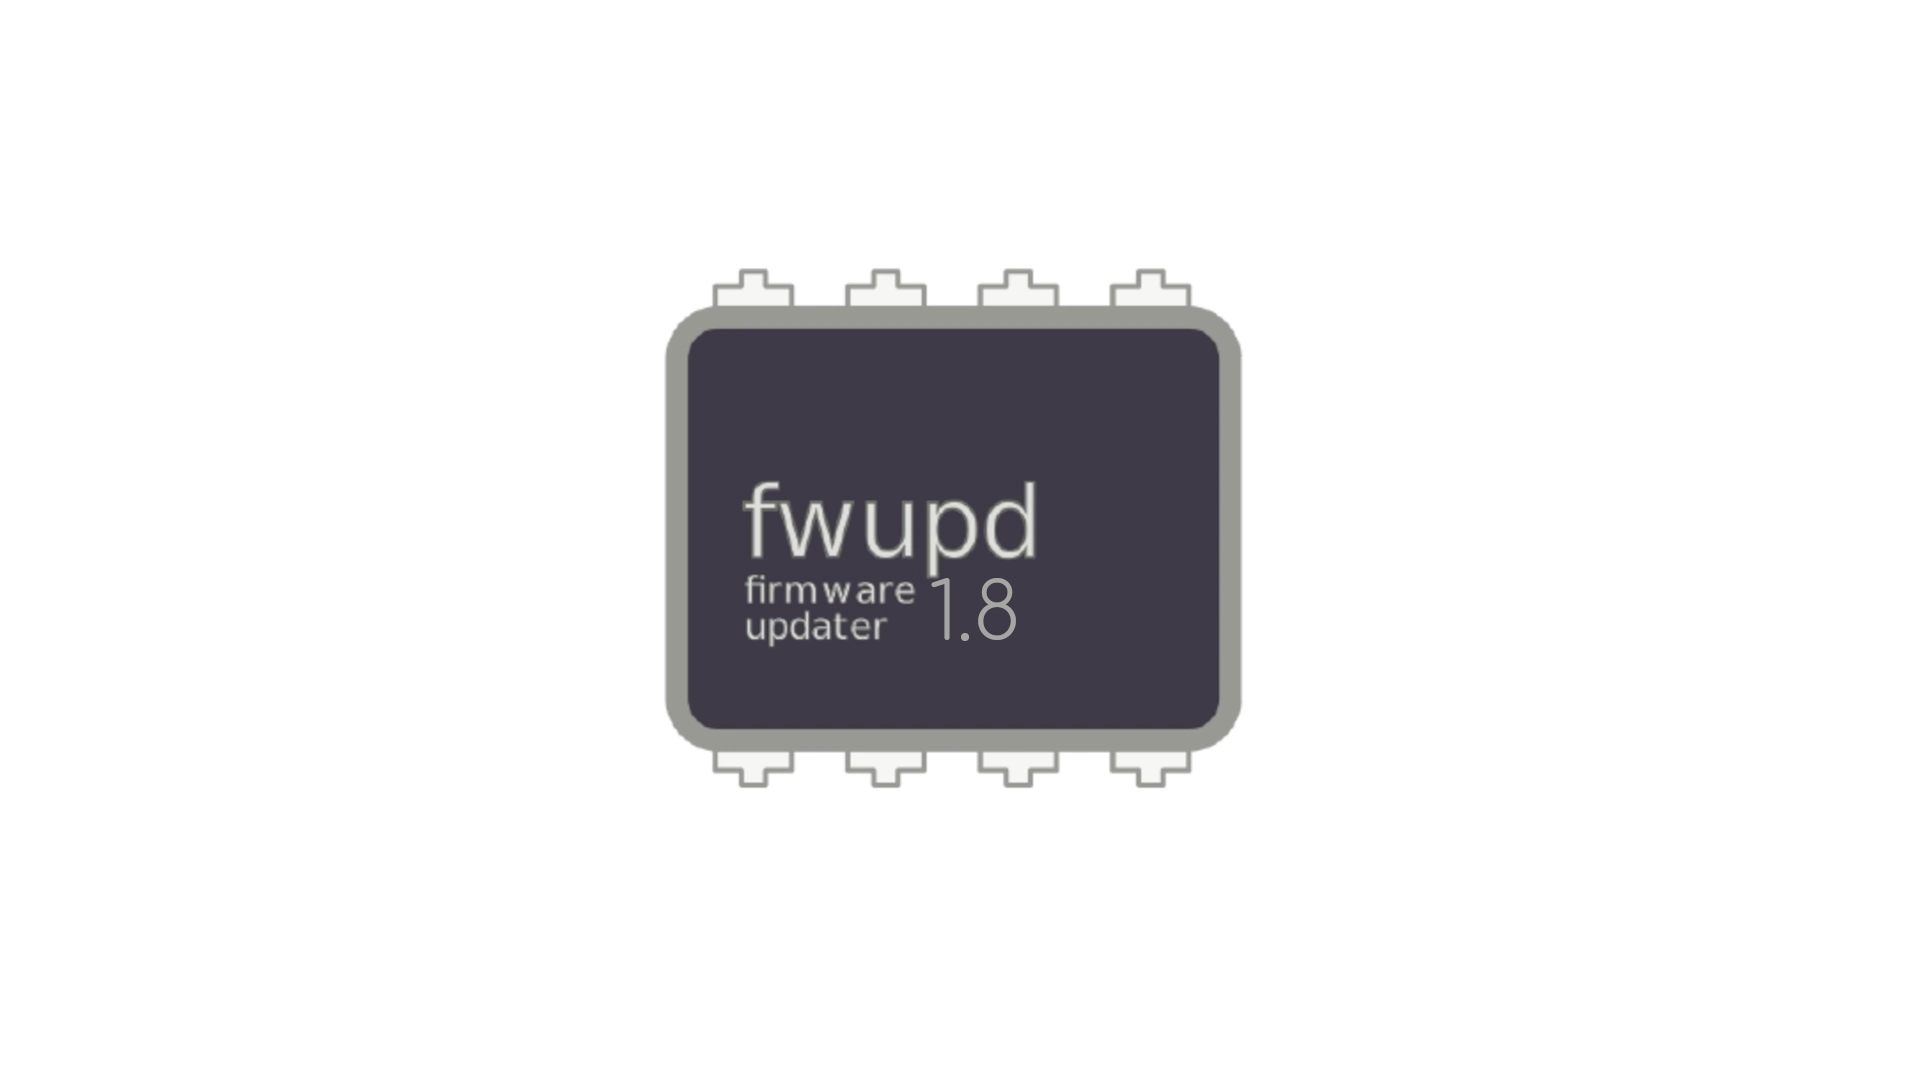 Fwupd 1.8 Linux Firmware Updating Tool Is Out With Support for New Hardware, More